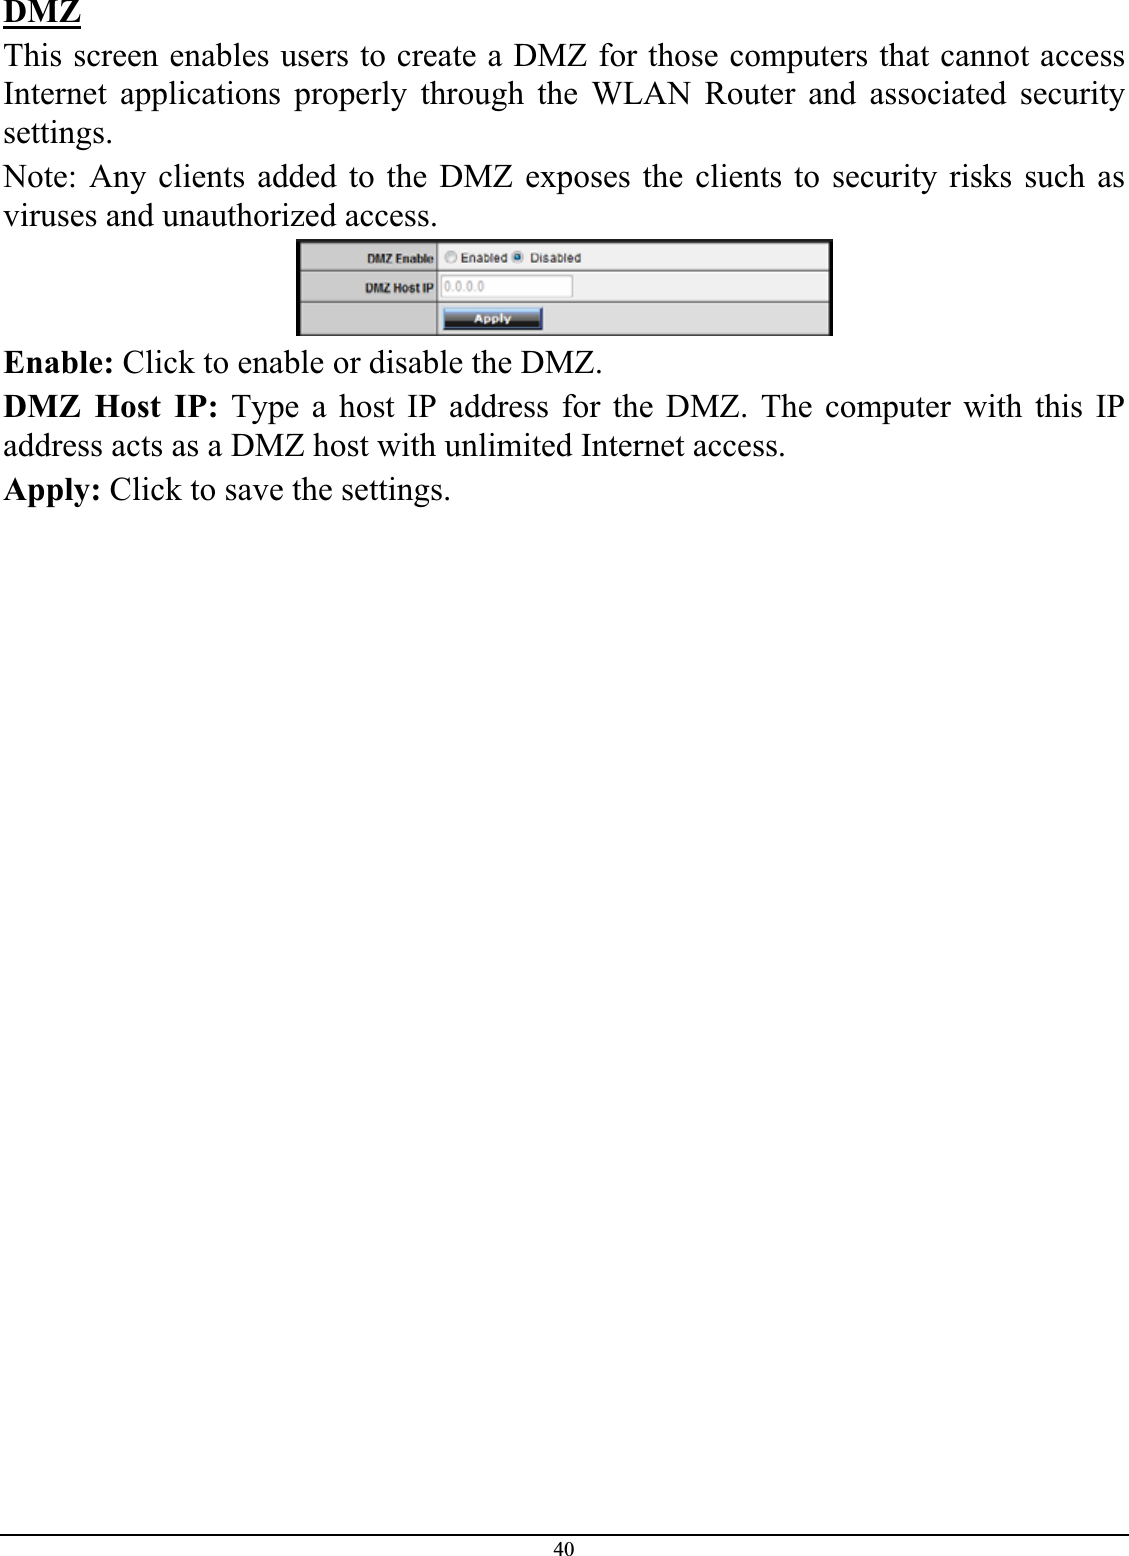 40DMZThis screen enables users to create a DMZ for those computers that cannot access Internet applications properly through the WLAN Router and associated security settings.Note: Any clients added to the DMZ exposes the clients to security risks such as viruses and unauthorized access. Enable: Click to enable or disable the DMZ. DMZ Host IP: Type a host IP address for the DMZ. The computer with this IP address acts as a DMZ host with unlimited Internet access. Apply: Click to save the settings. 